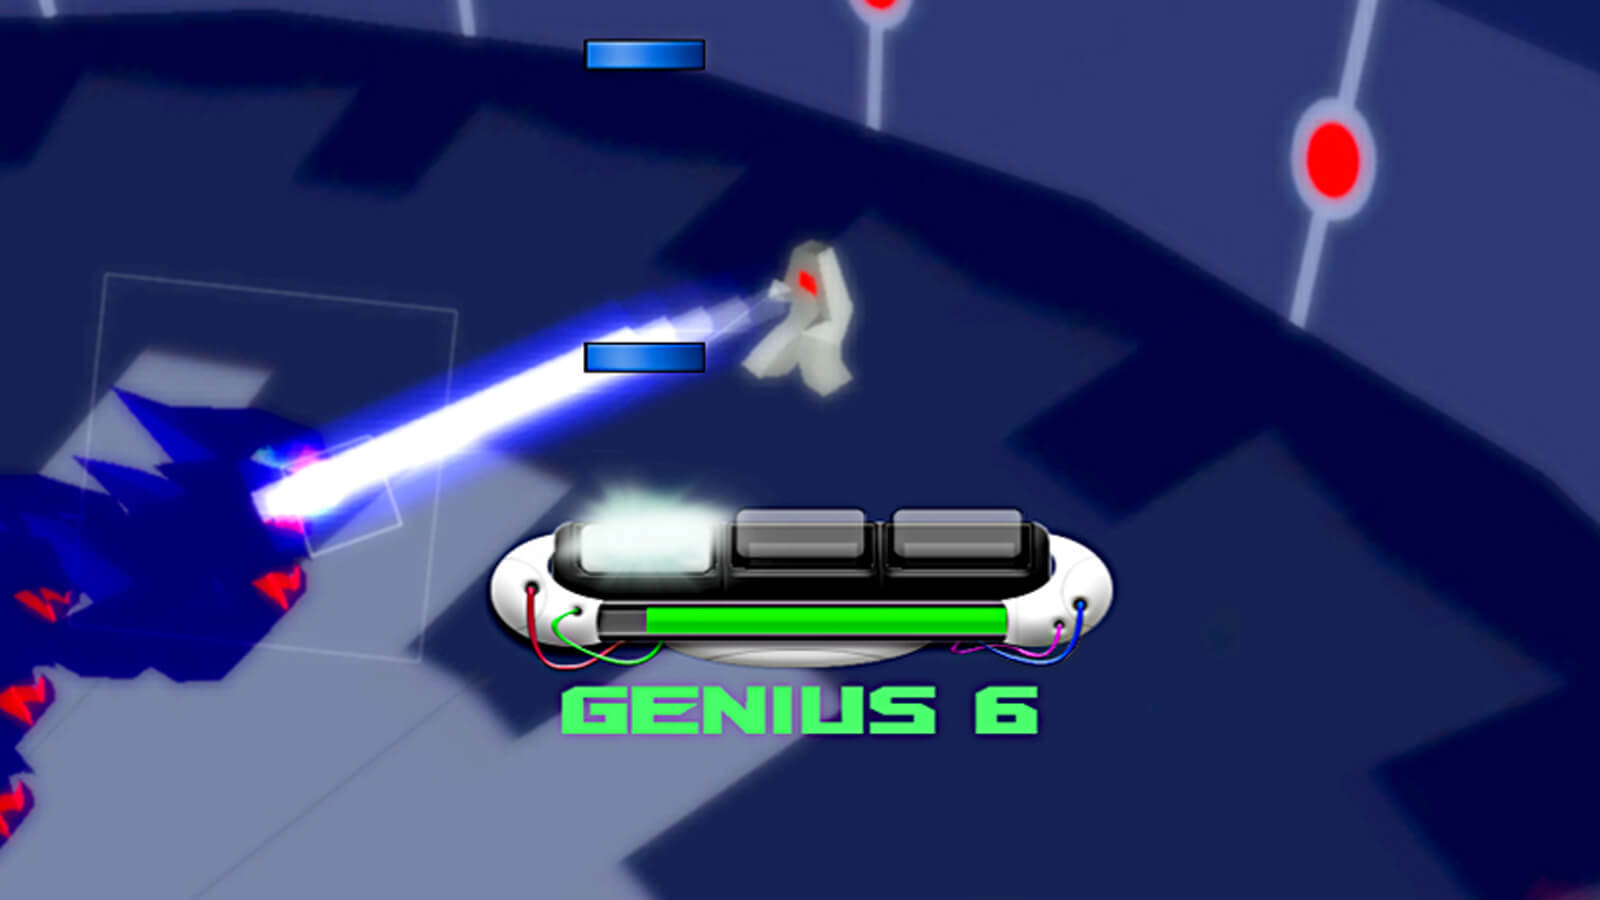 A blue dash falls towards a console with the word "GENIUS 6" below it.